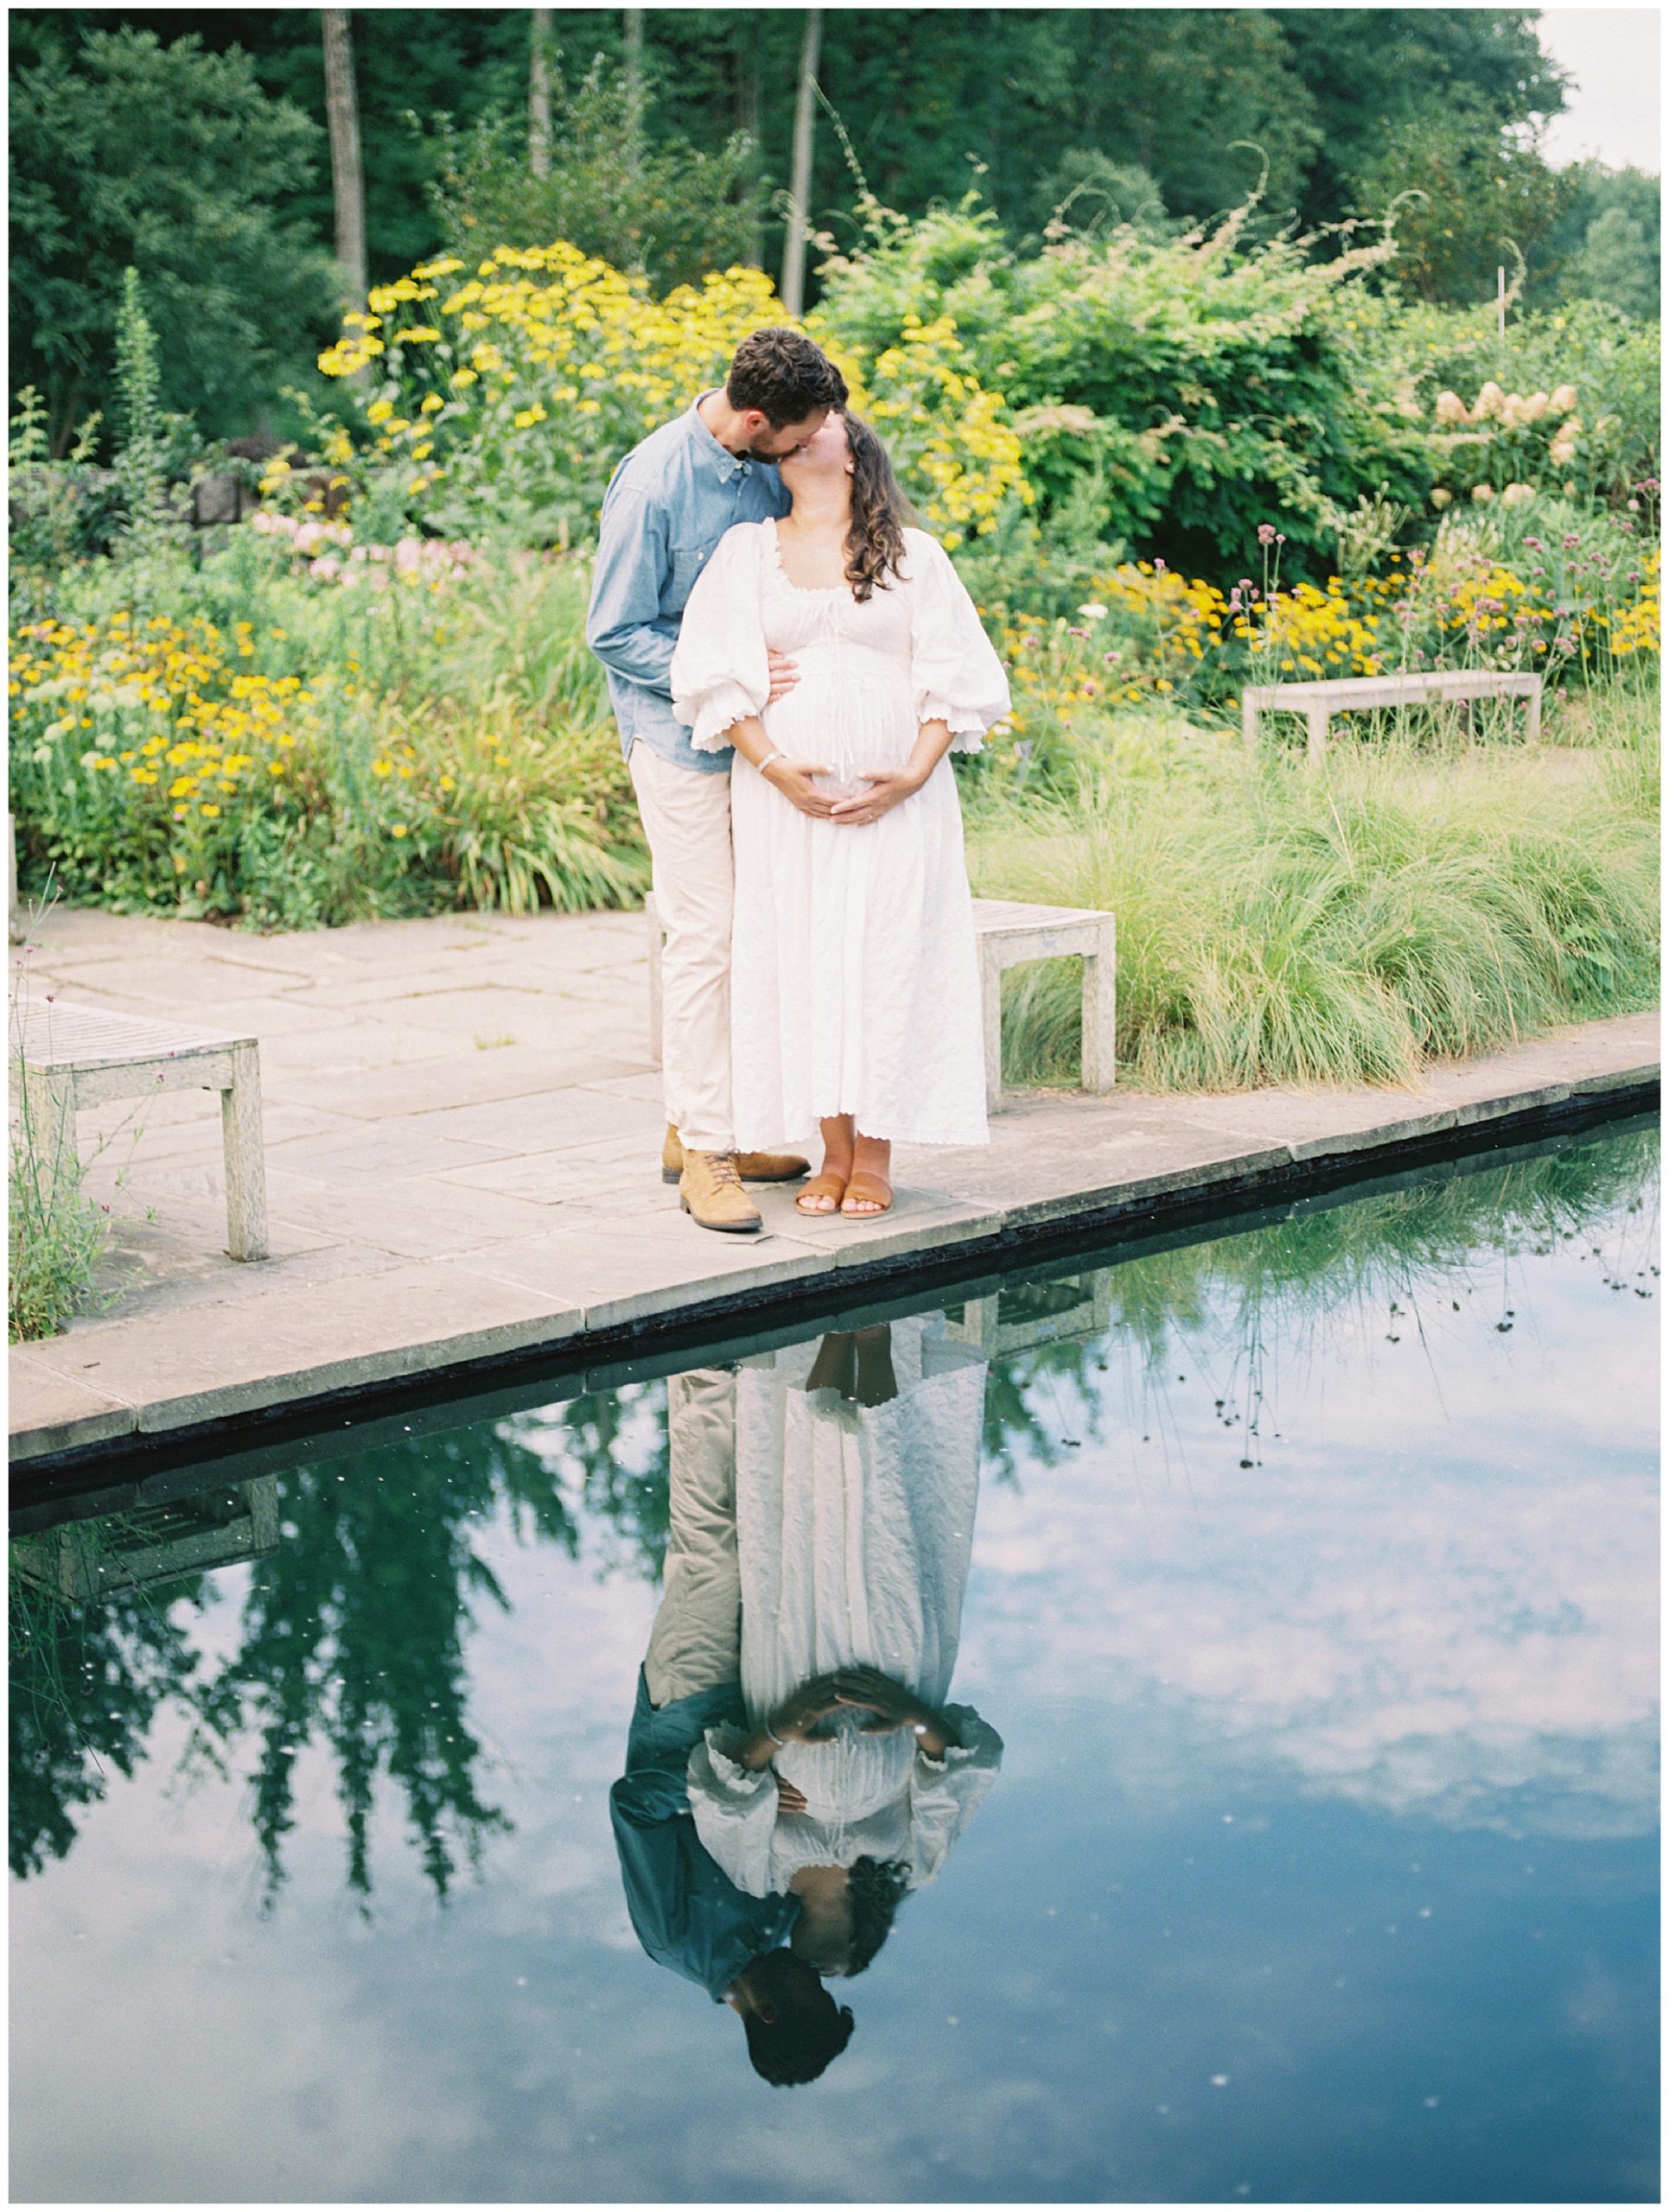 Couple kisses by a pond during their floral maternity session at Brookside Gardens.